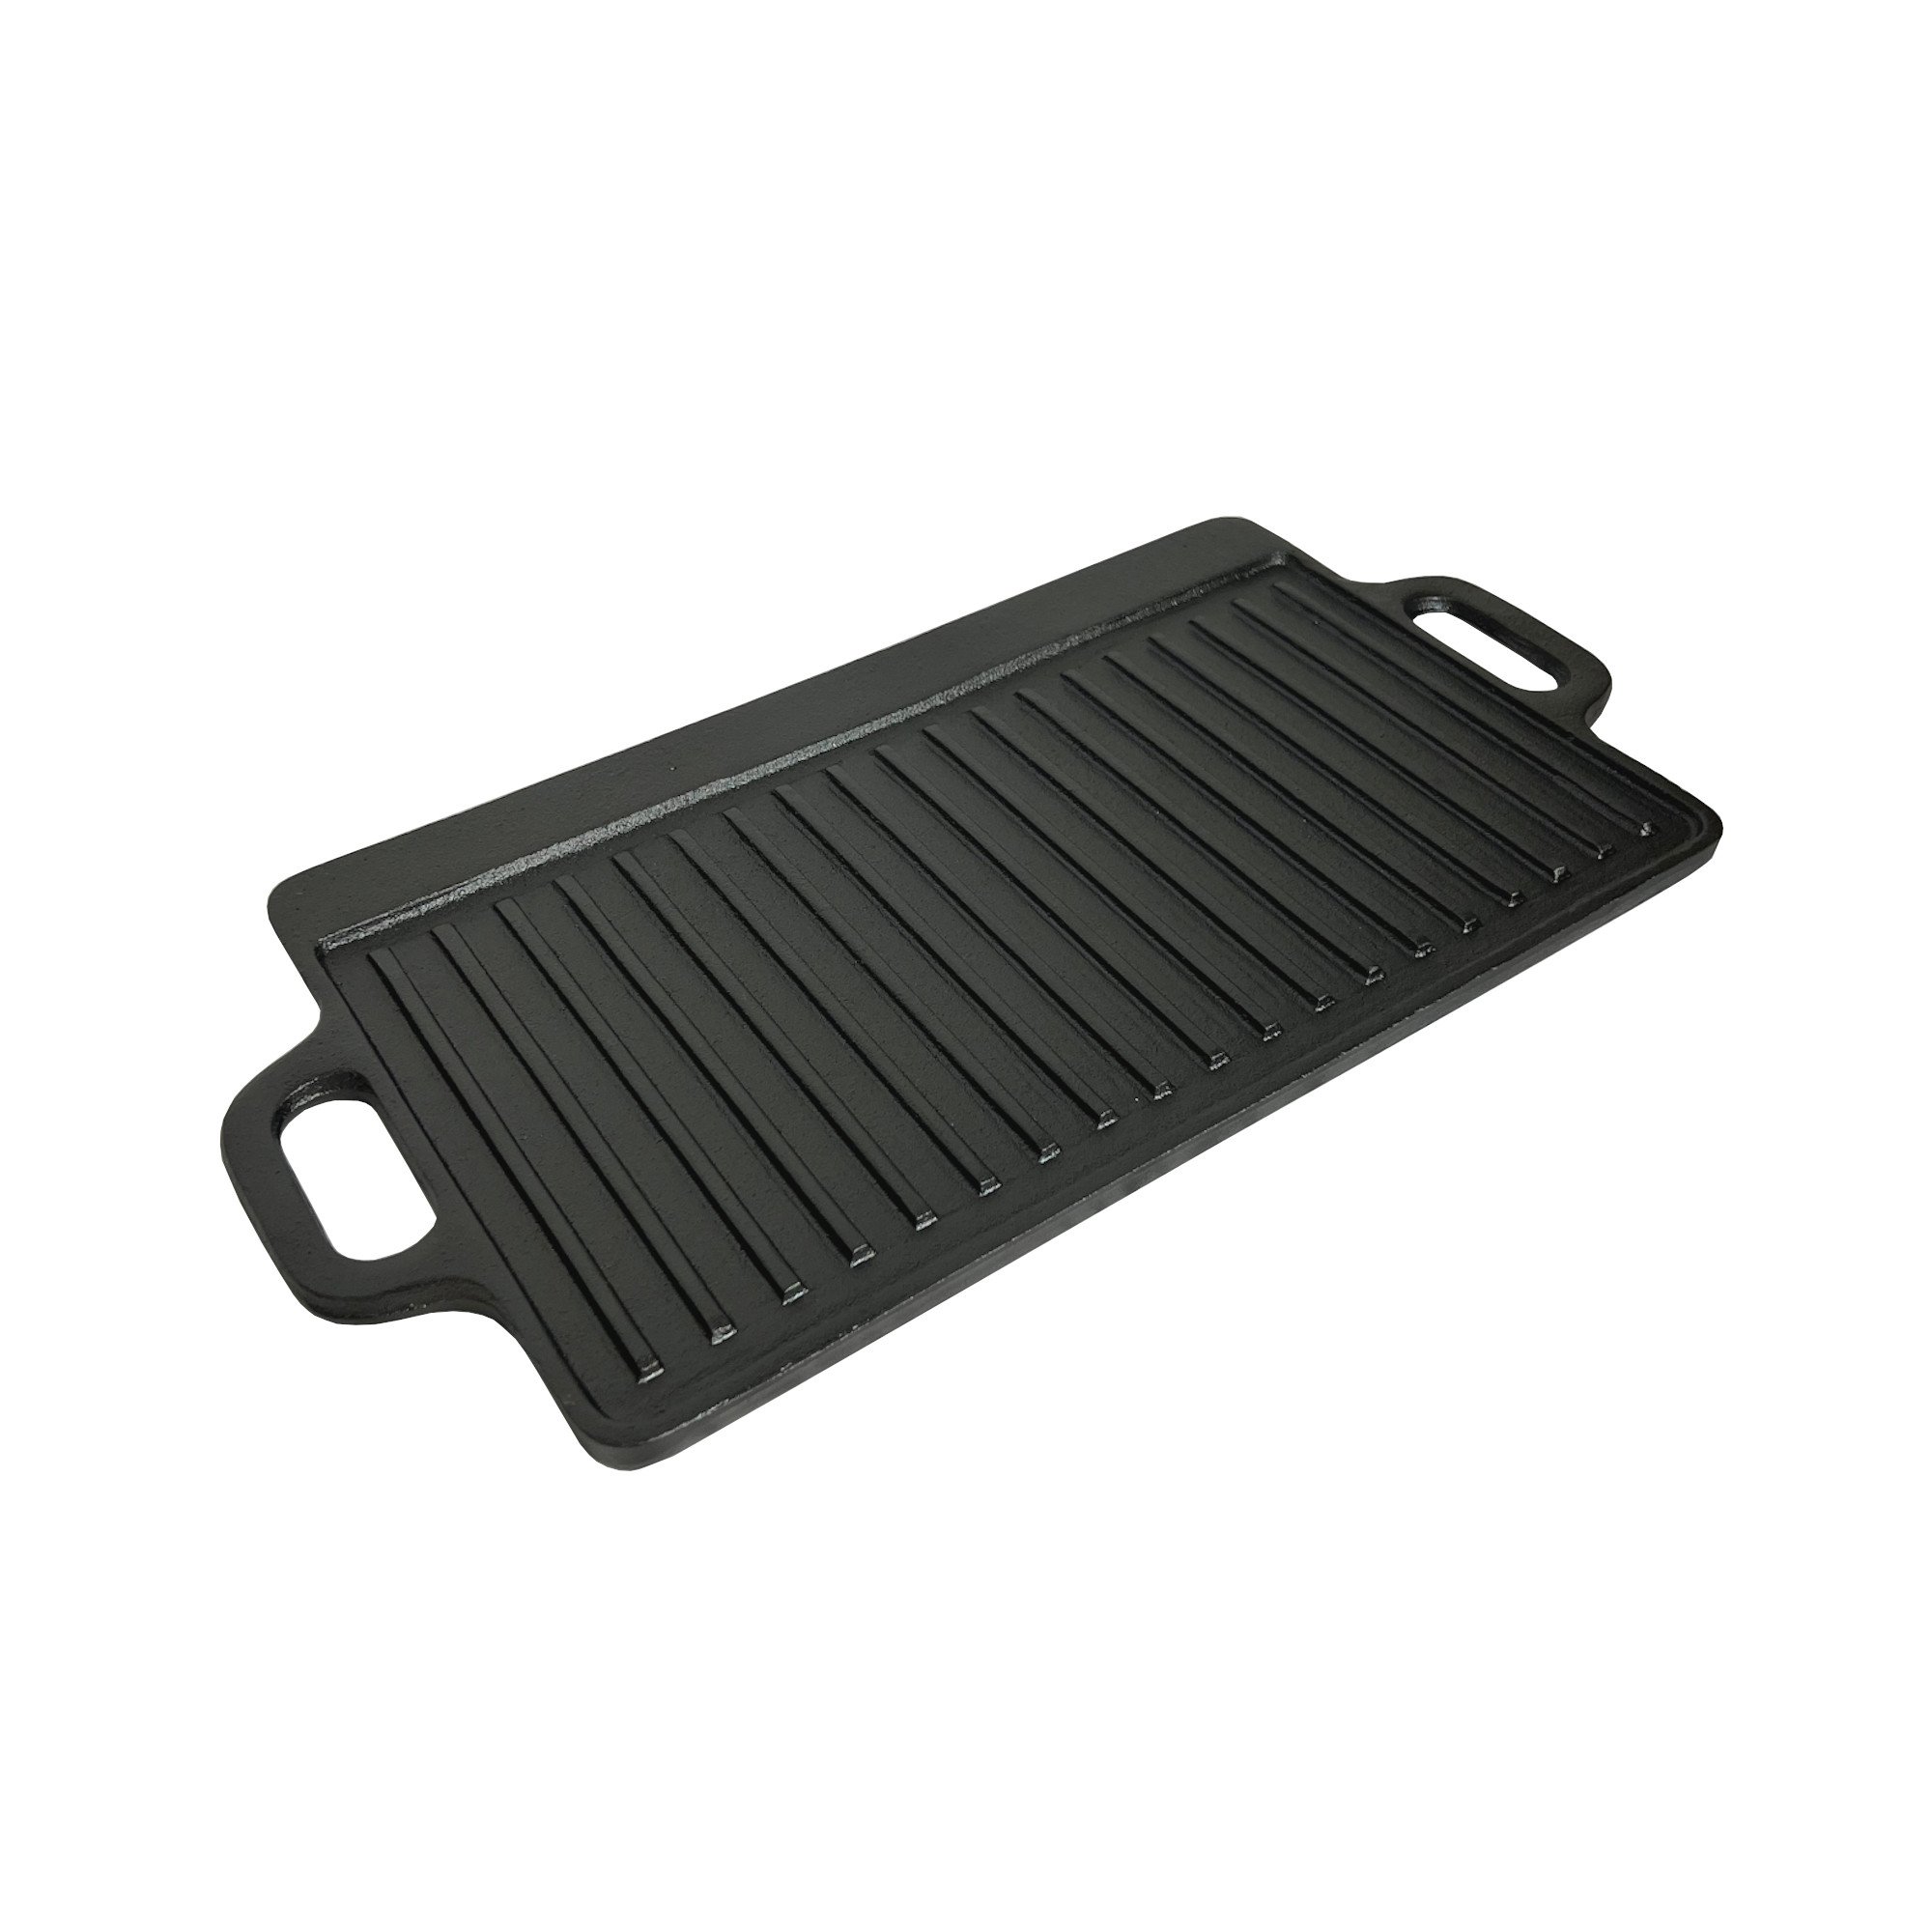 https://oypla.com/images/products/4181-cast-iron-non-stick-reversible-griddle-pan-bbq-grill-plate-04.jpg